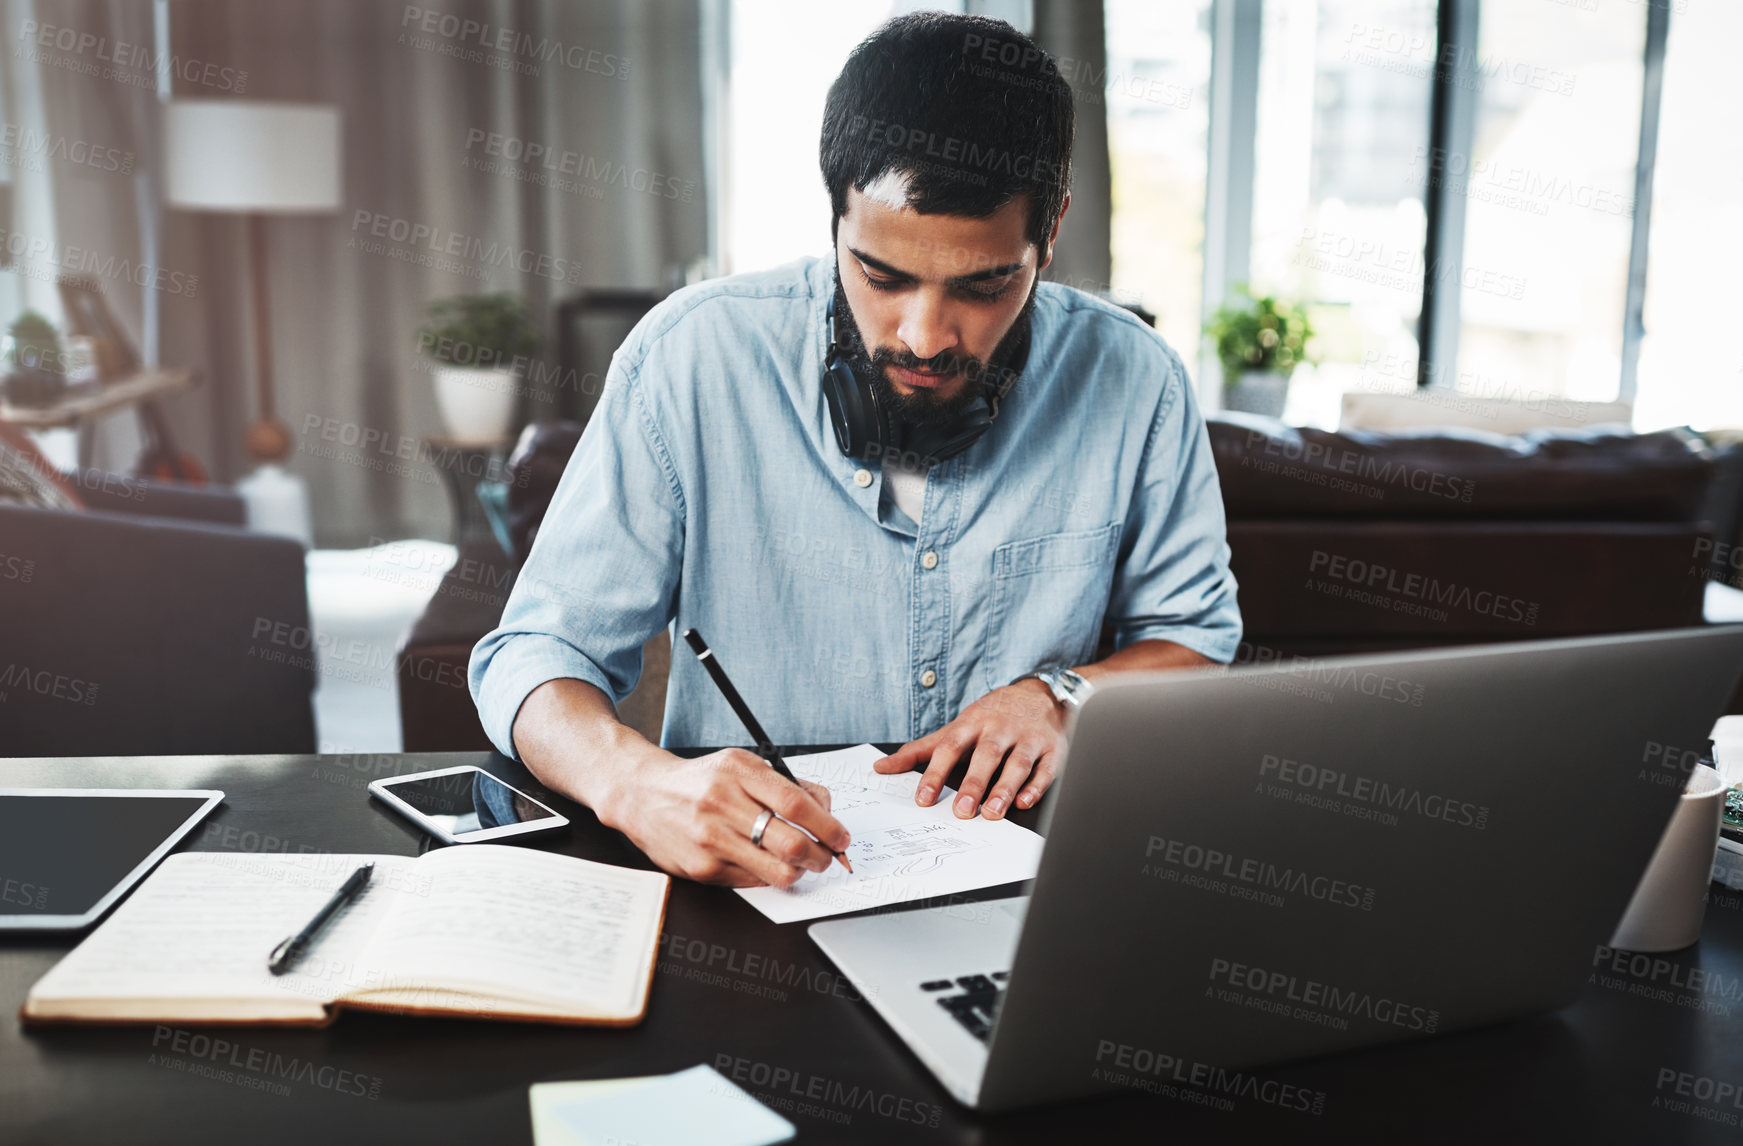 Buy stock photo Shot of a young man making notes while busy working from home